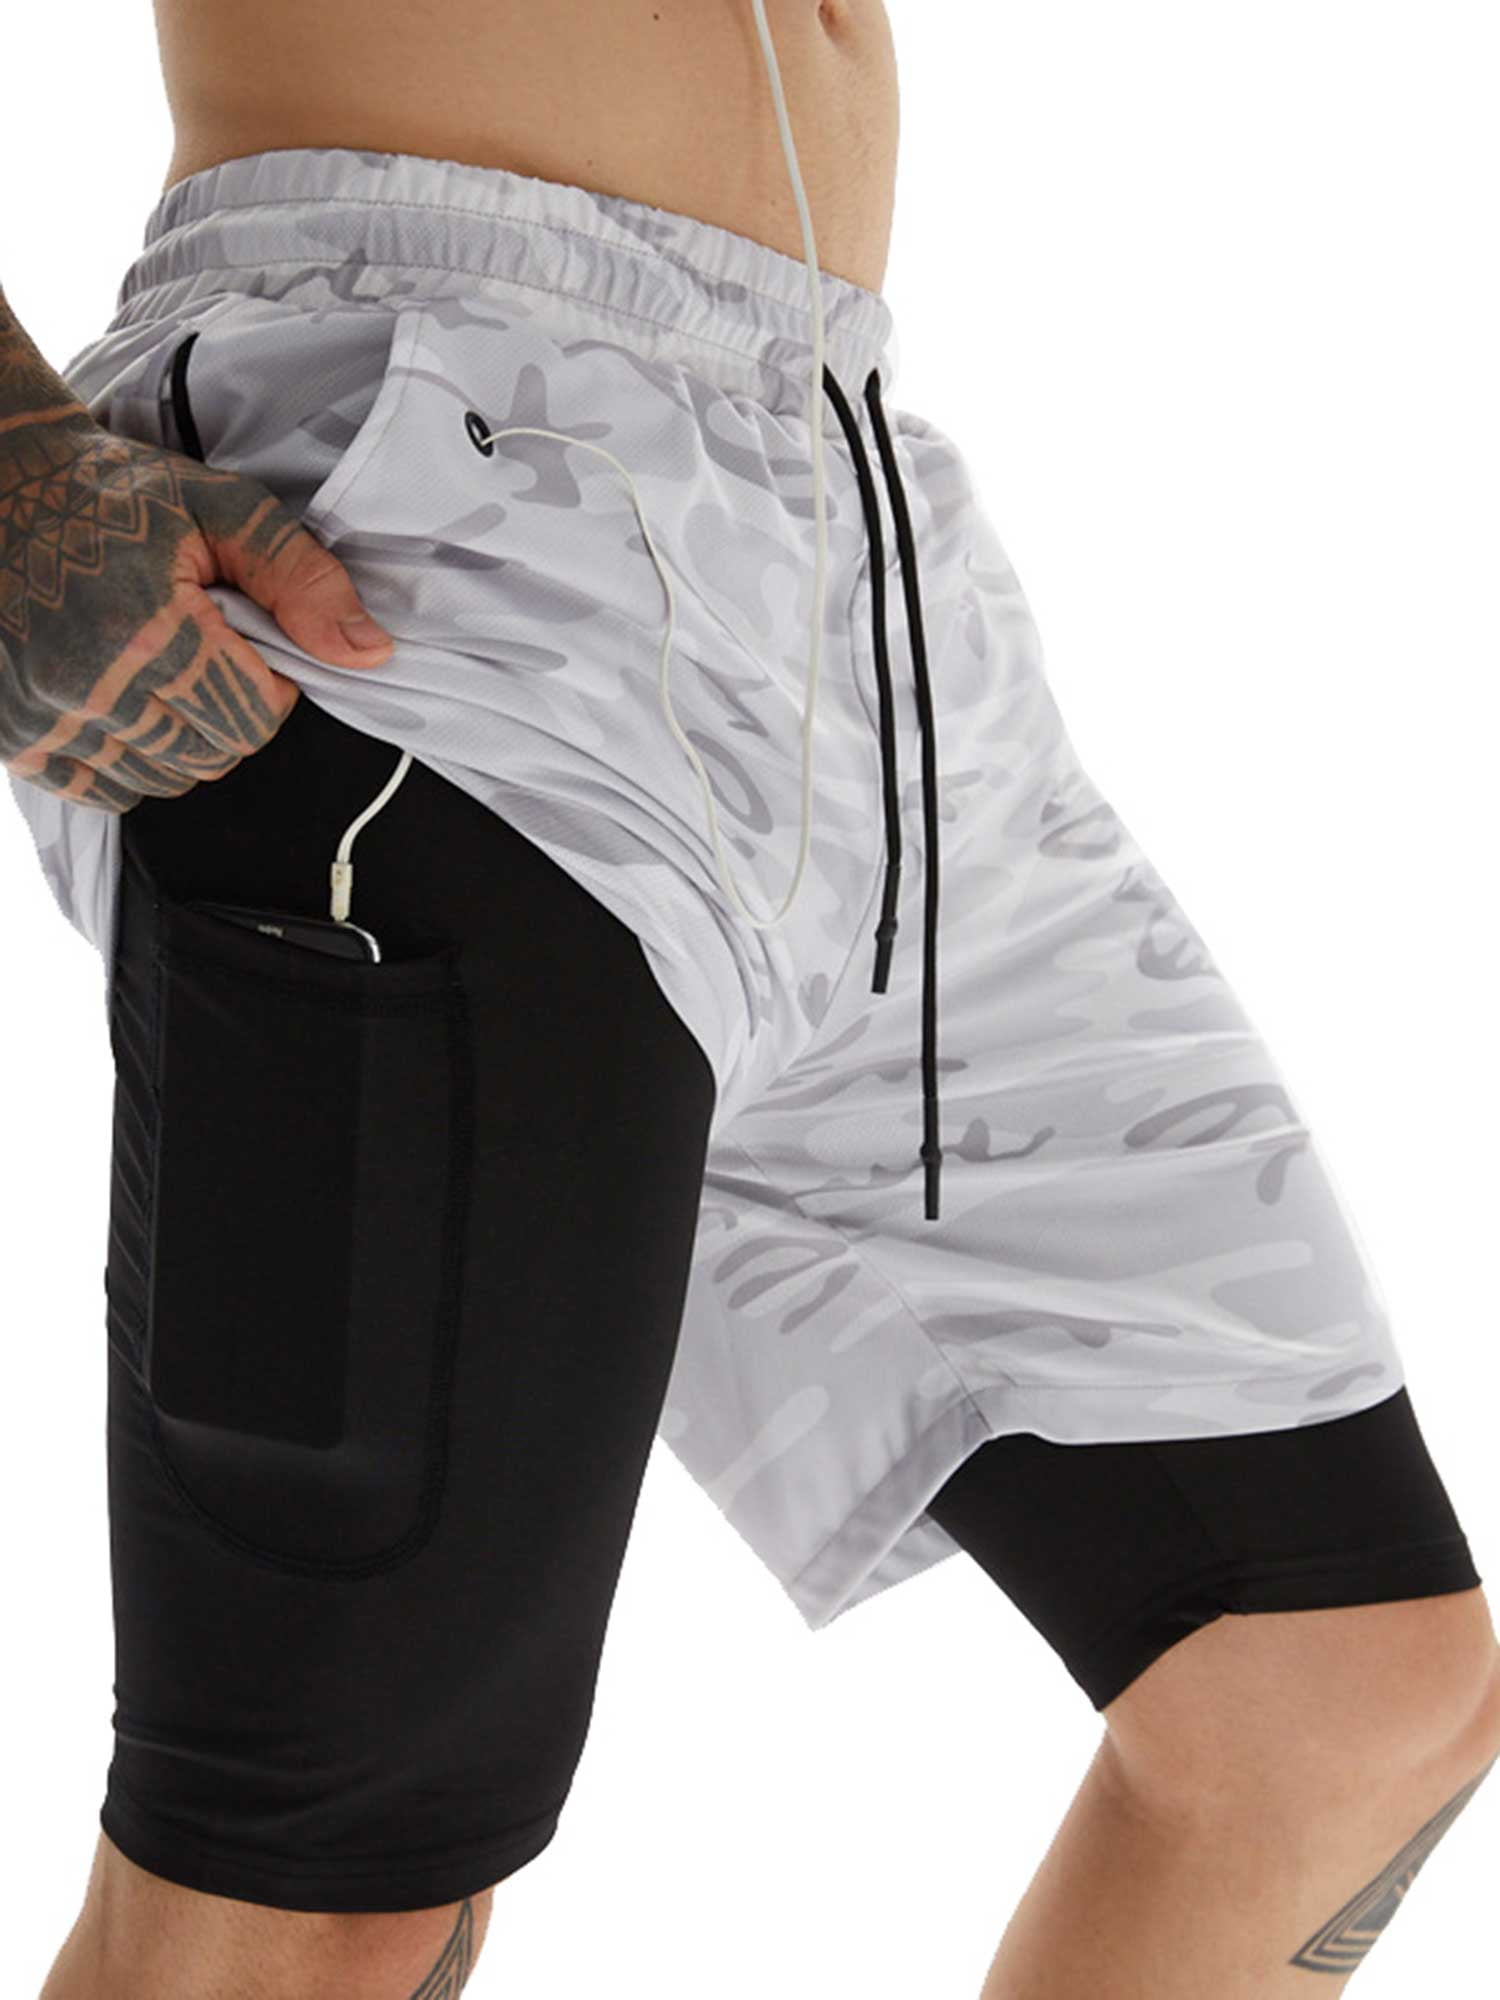 Men's Casual Sport Shorts 2 in 1 Running Shorts with Pocket Quick